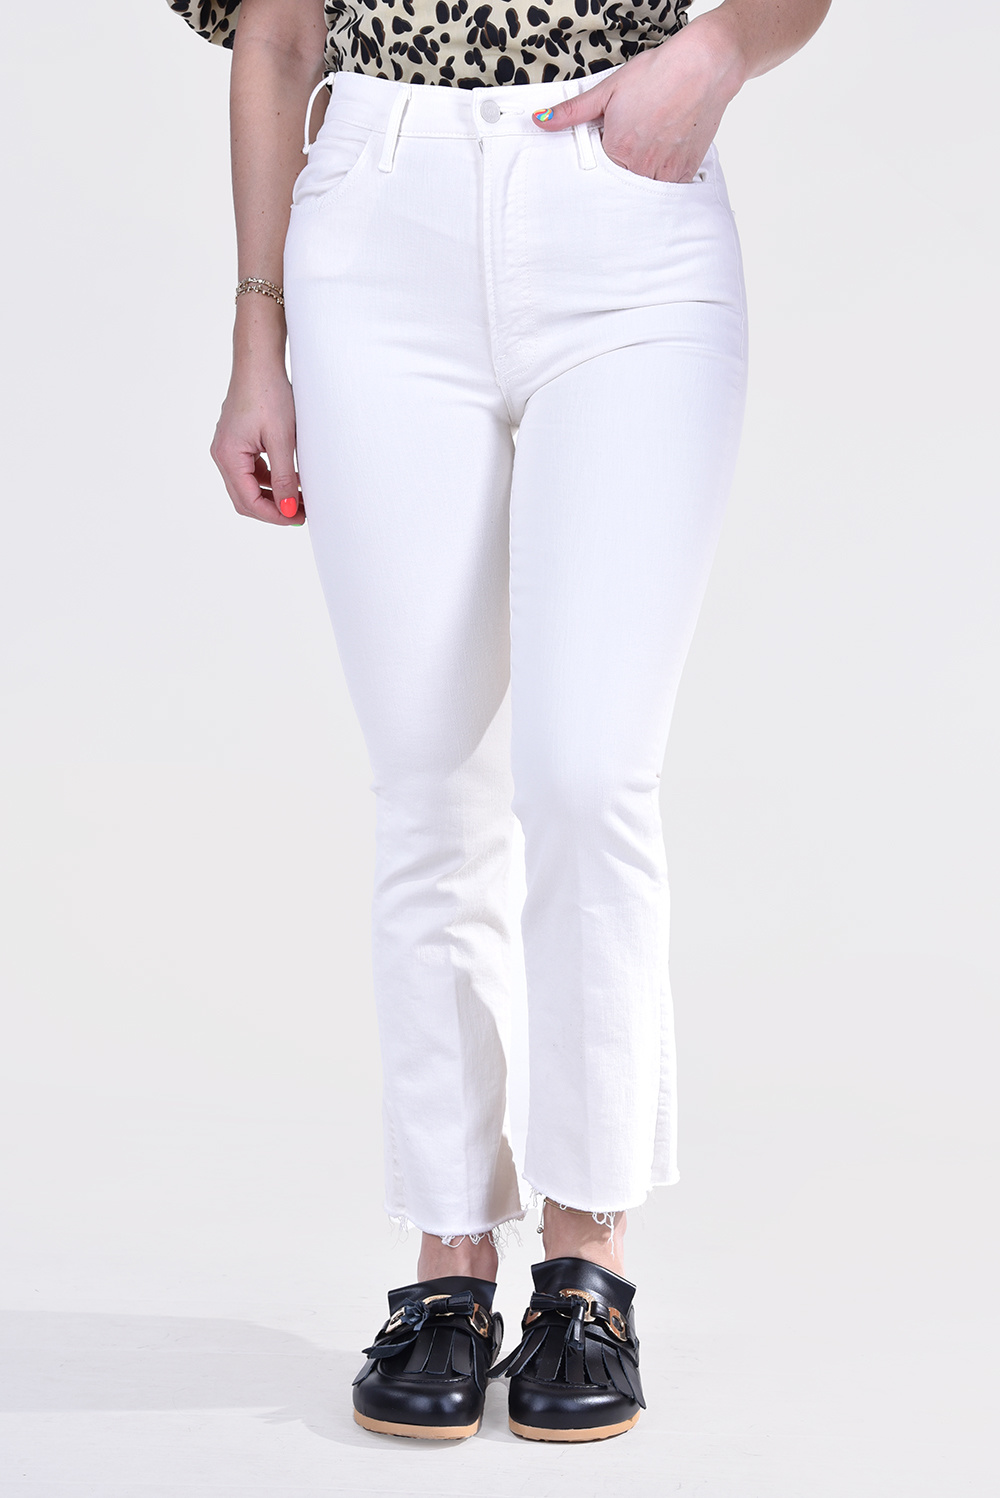 Productafbeelding: Mother jeans Hustler Ankle Fray 1117 753 A creme